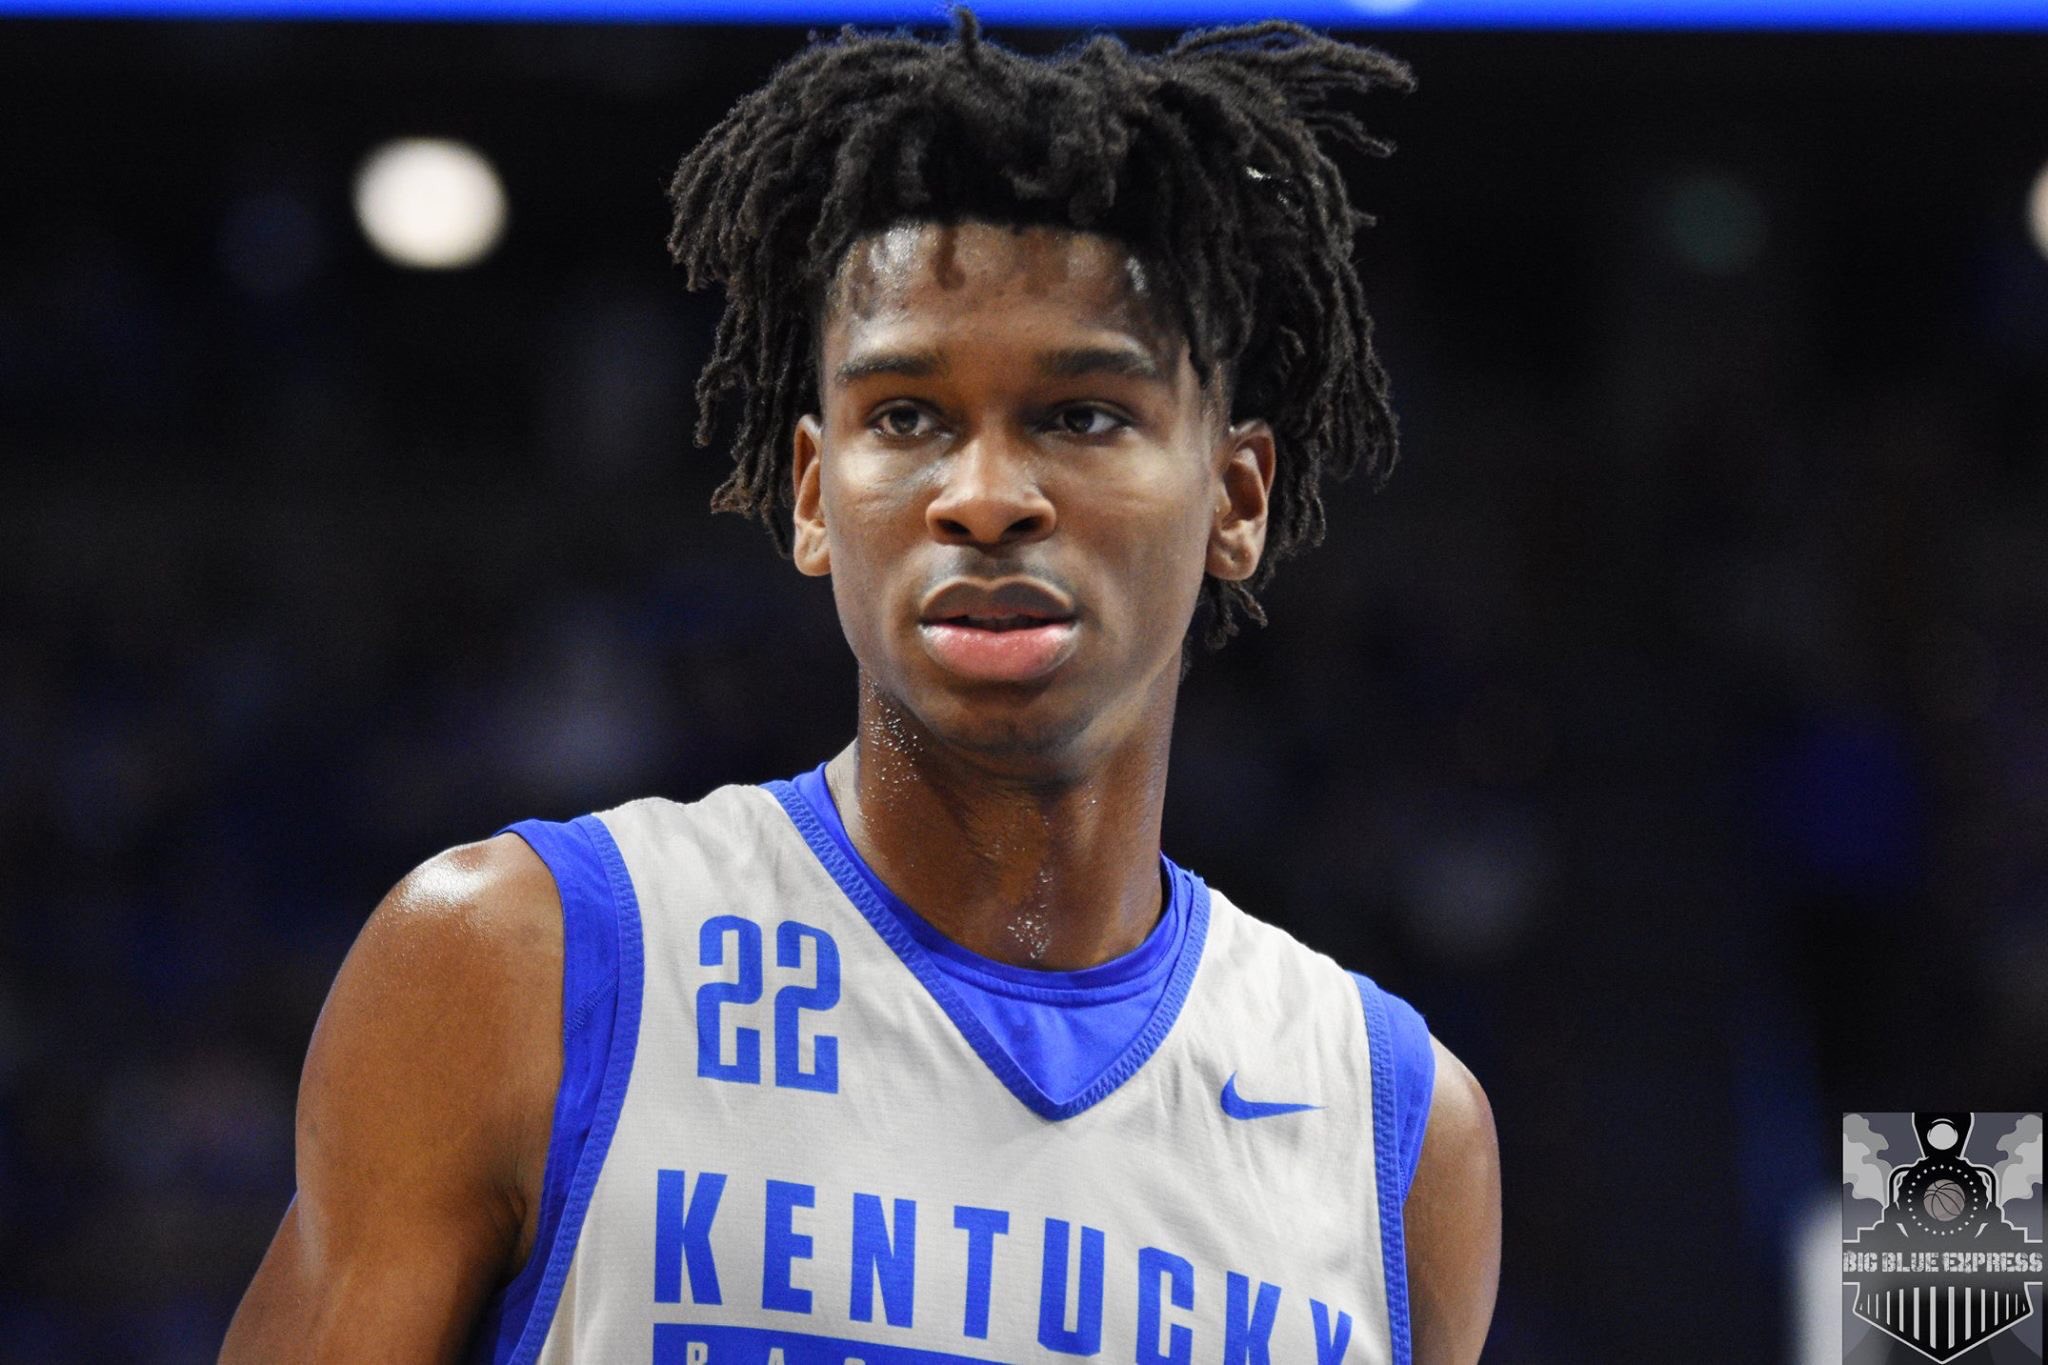 Big Blue Express on X: Shai Gilgeous-Alexander with the wrap